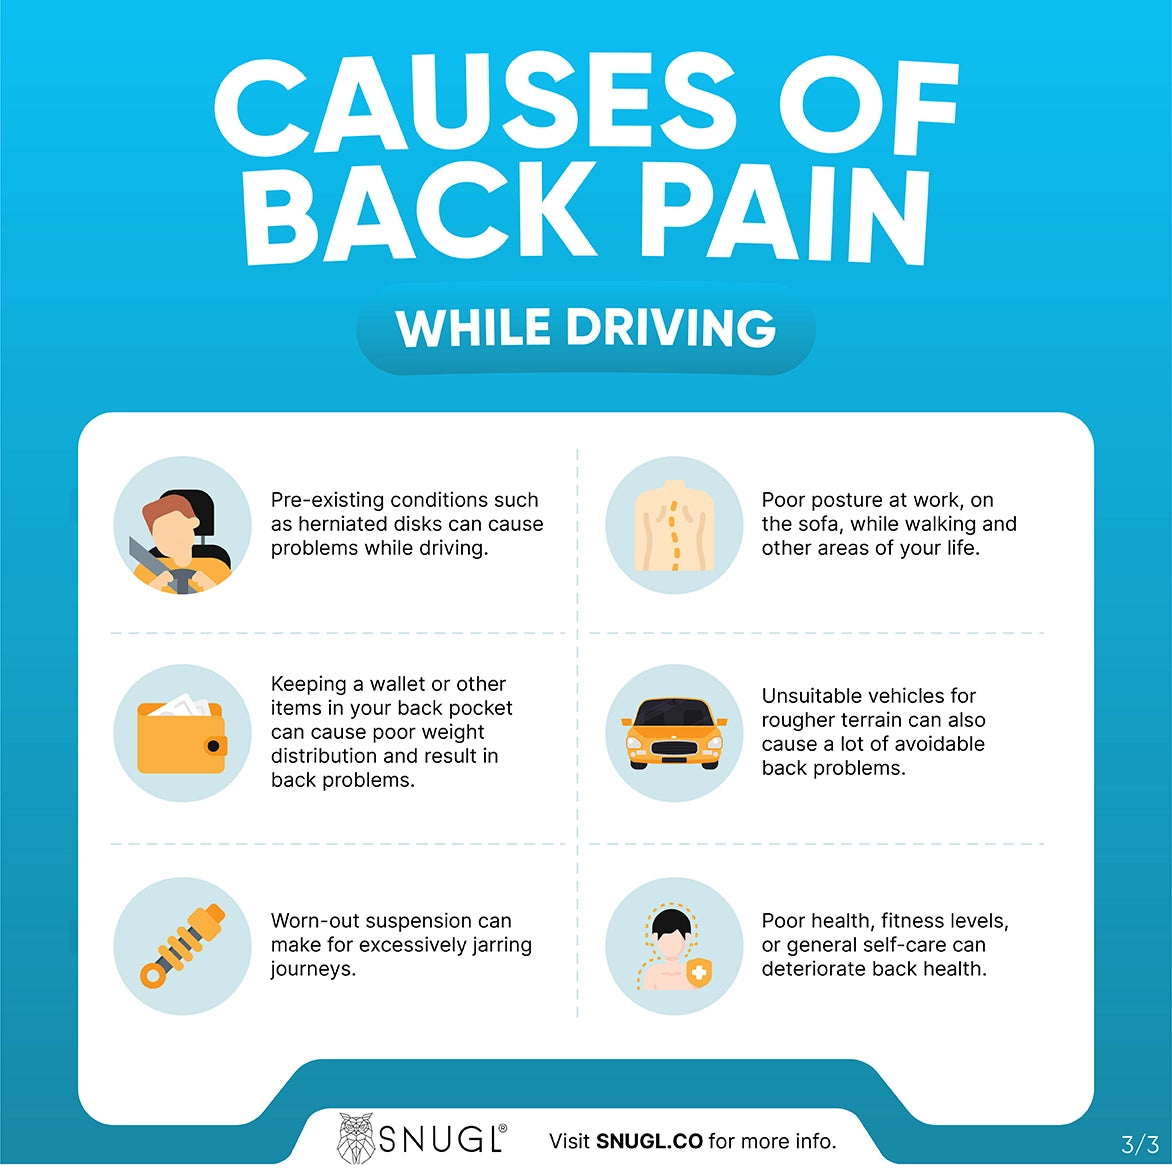 Driving with Back Pain